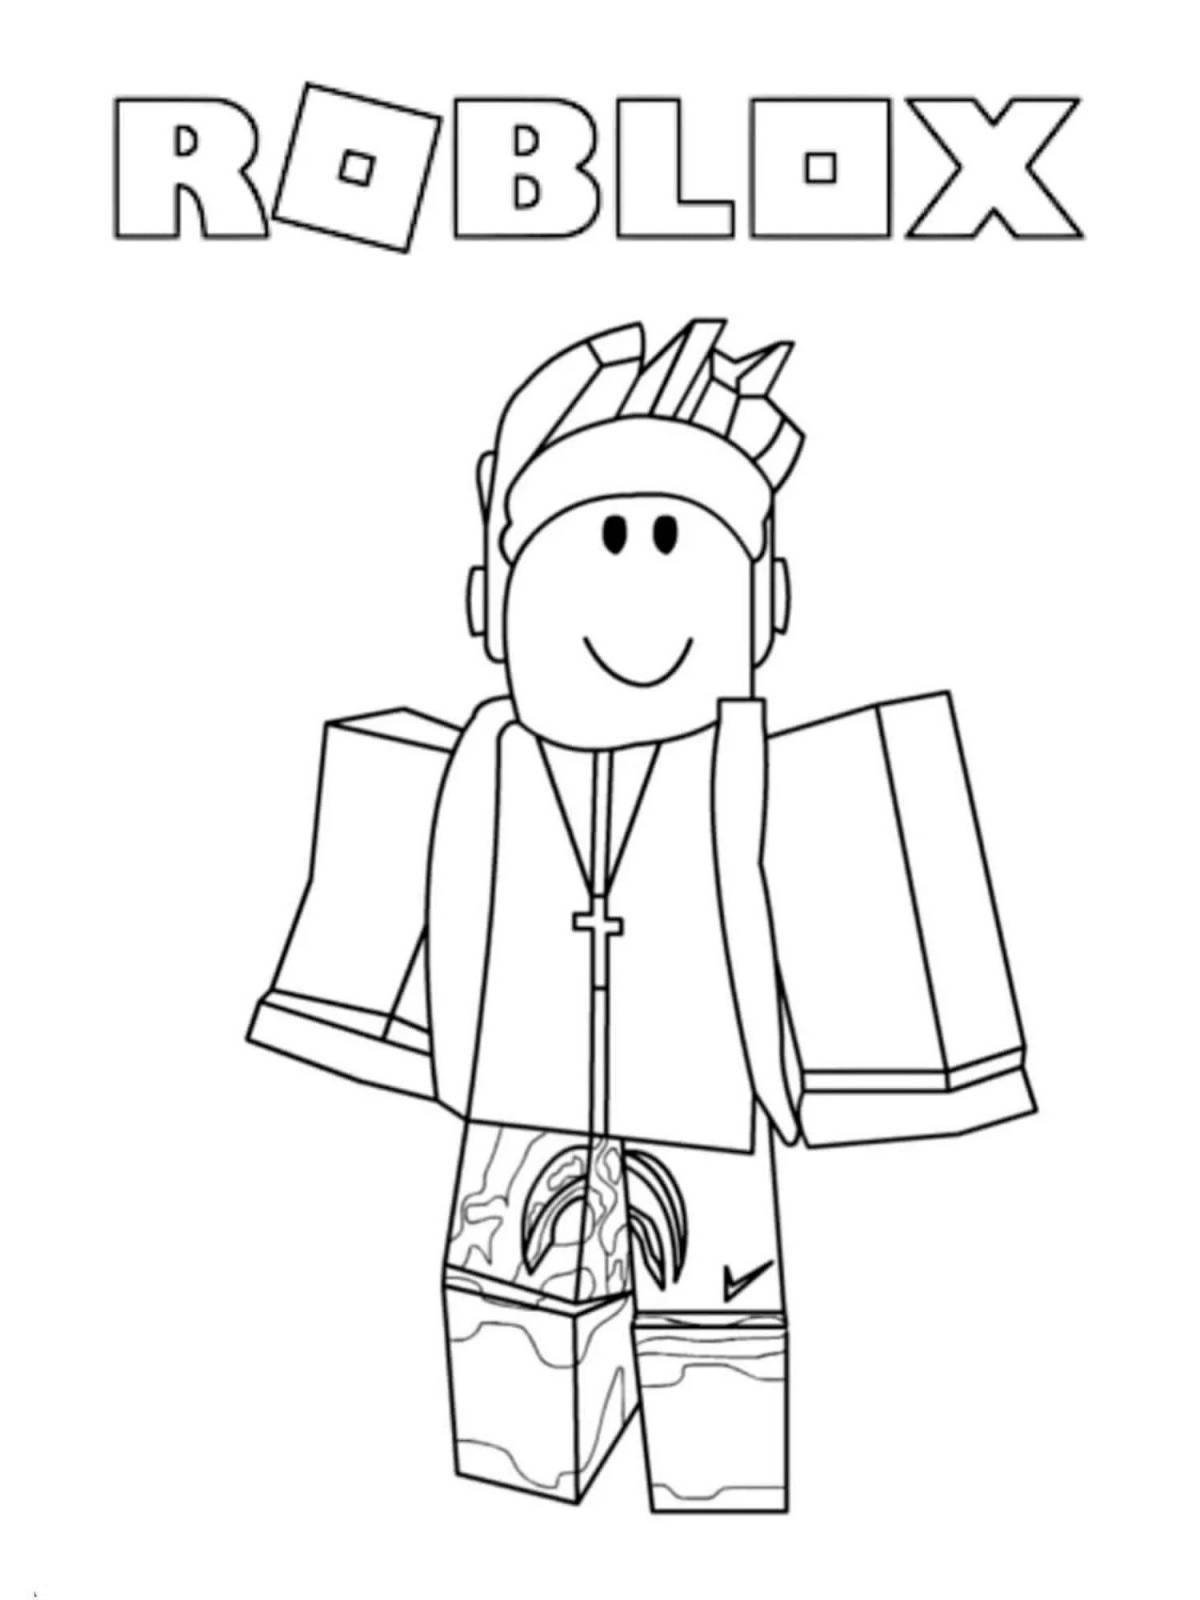 Robloxers awesome coloring pages